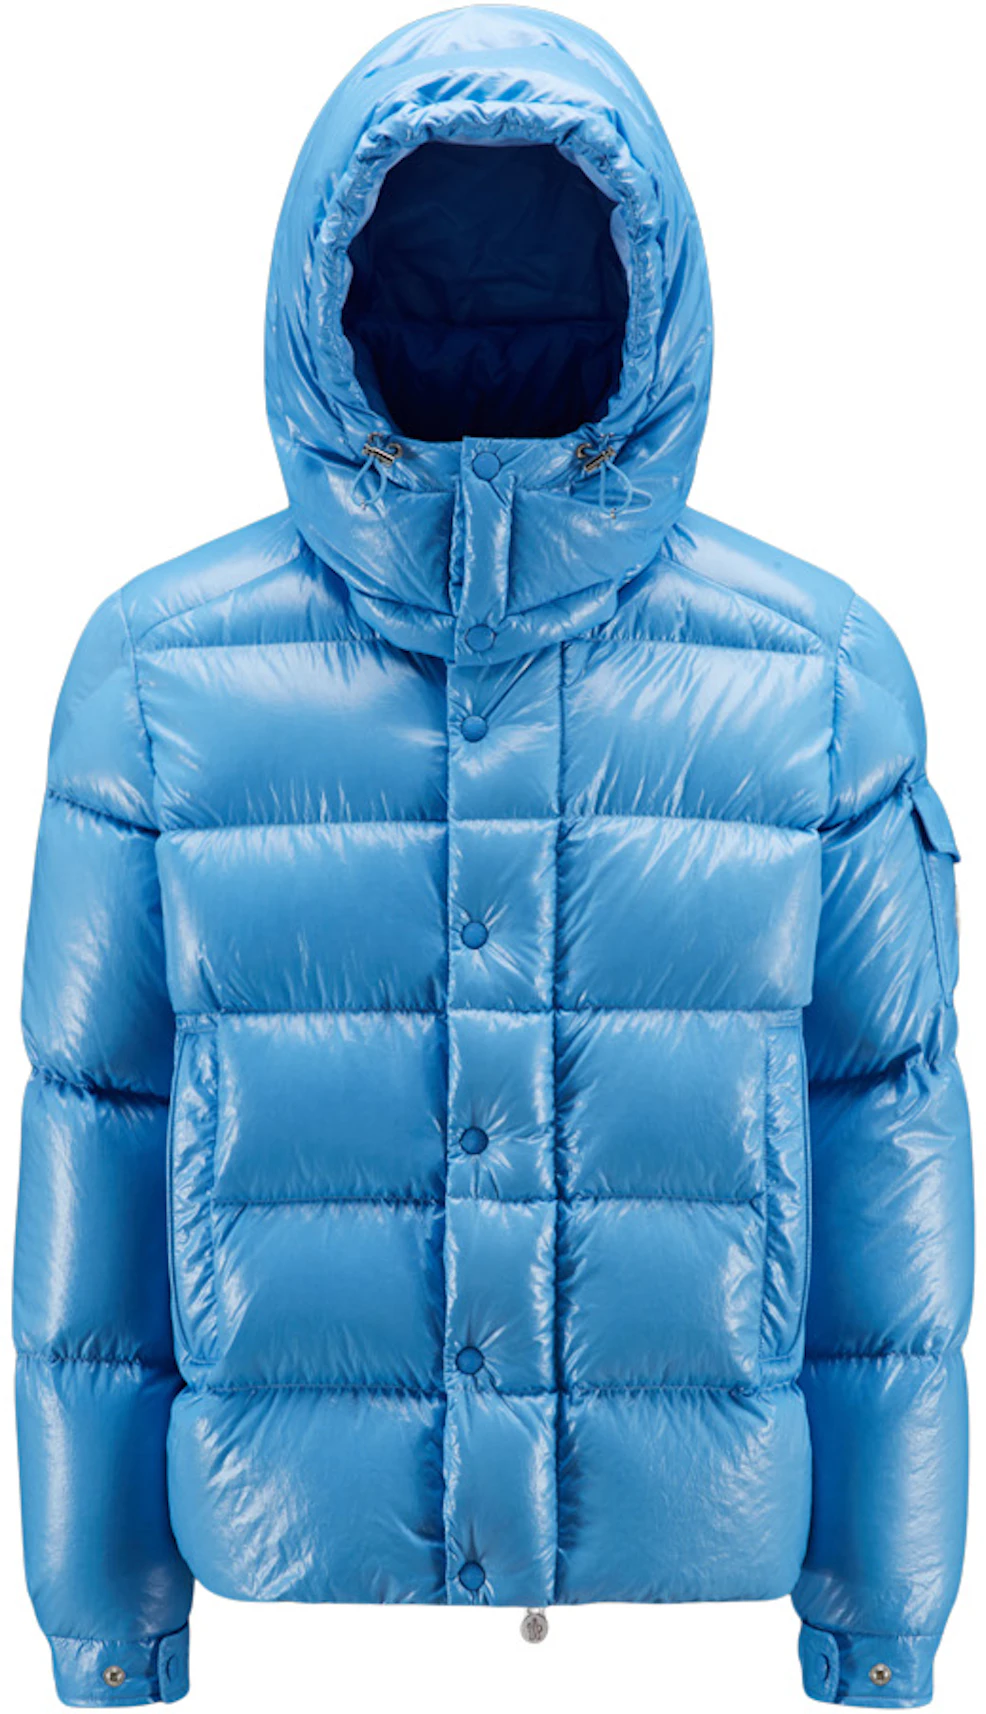 Moncler Limited Edition | lupon.gov.ph